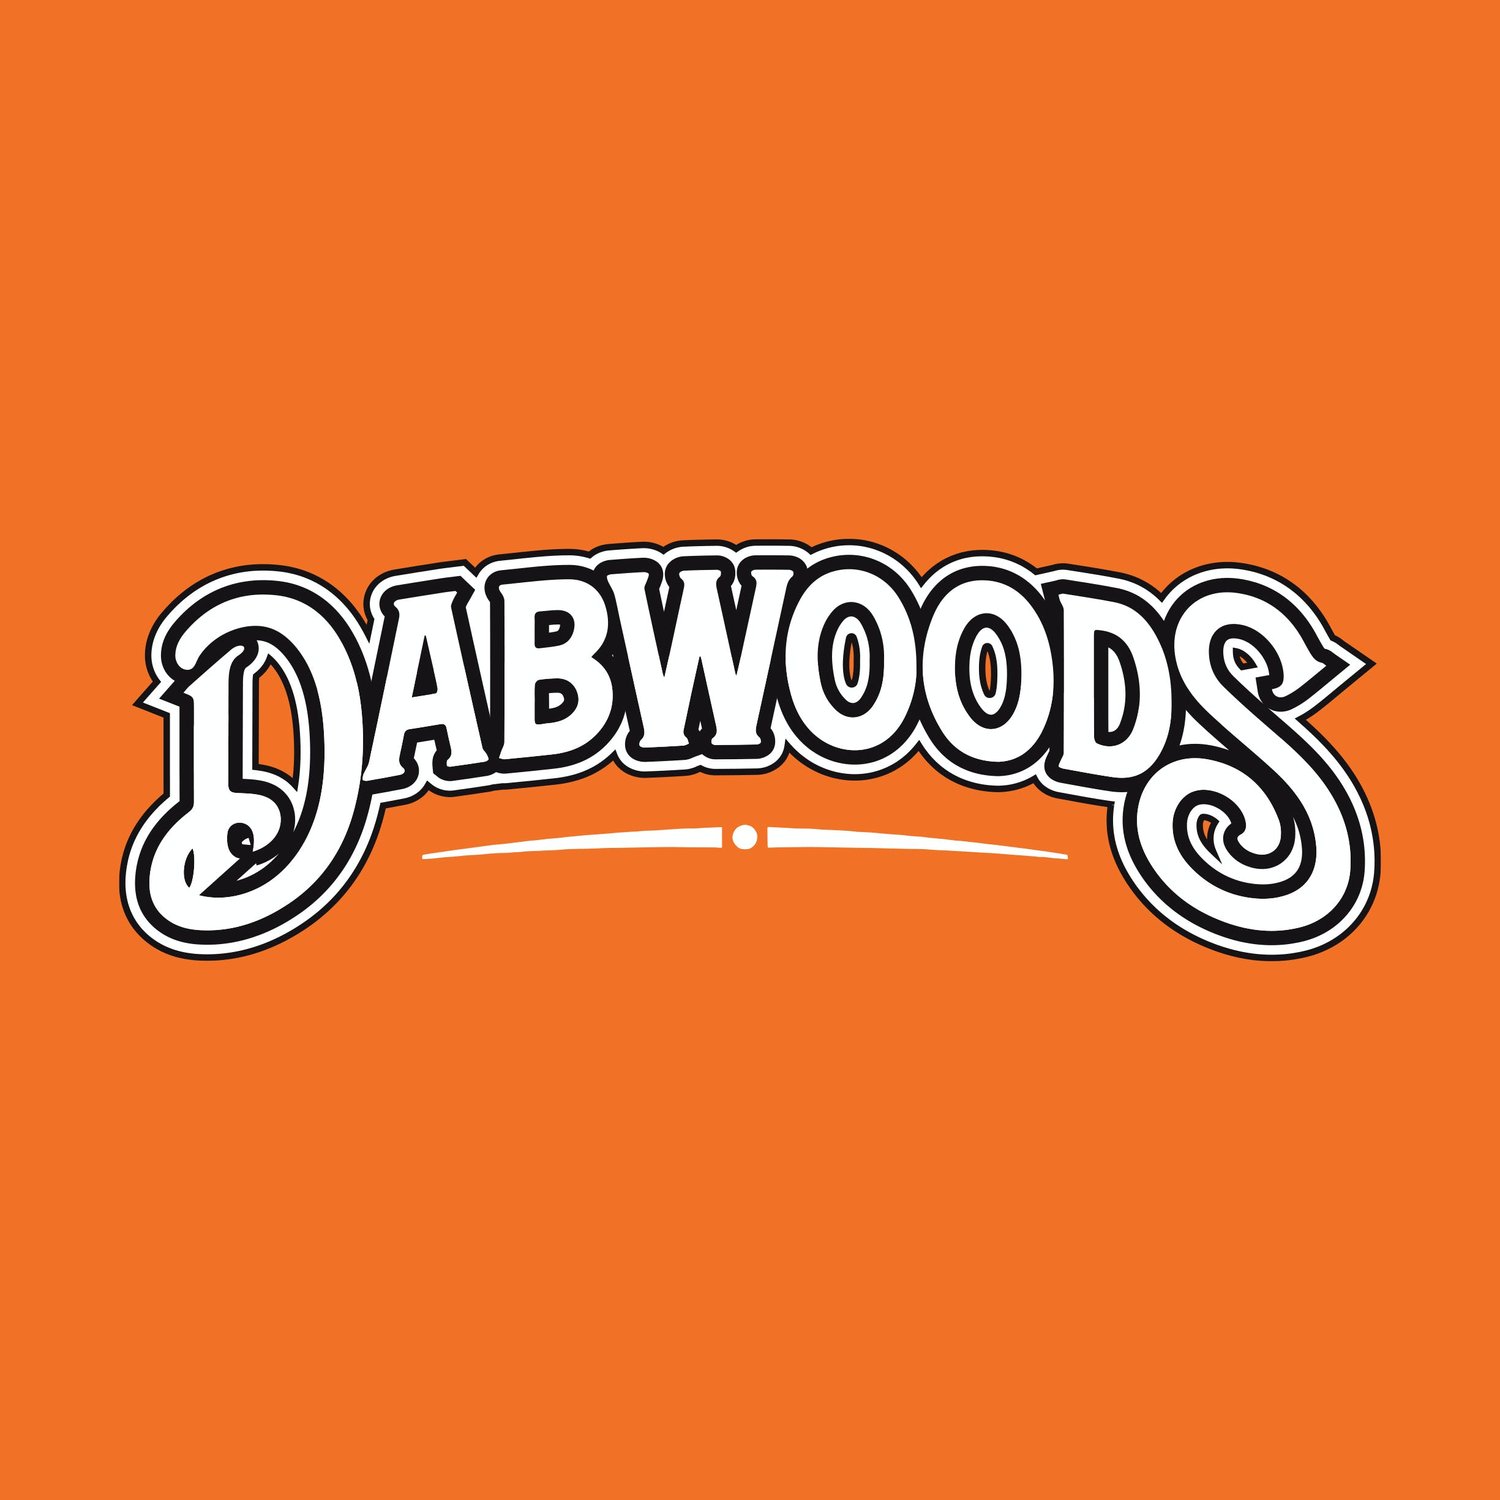 Dabwoods are high quality disposables for the discerning consumer. Explore our premium selection of potent strains on our dabwoods website.